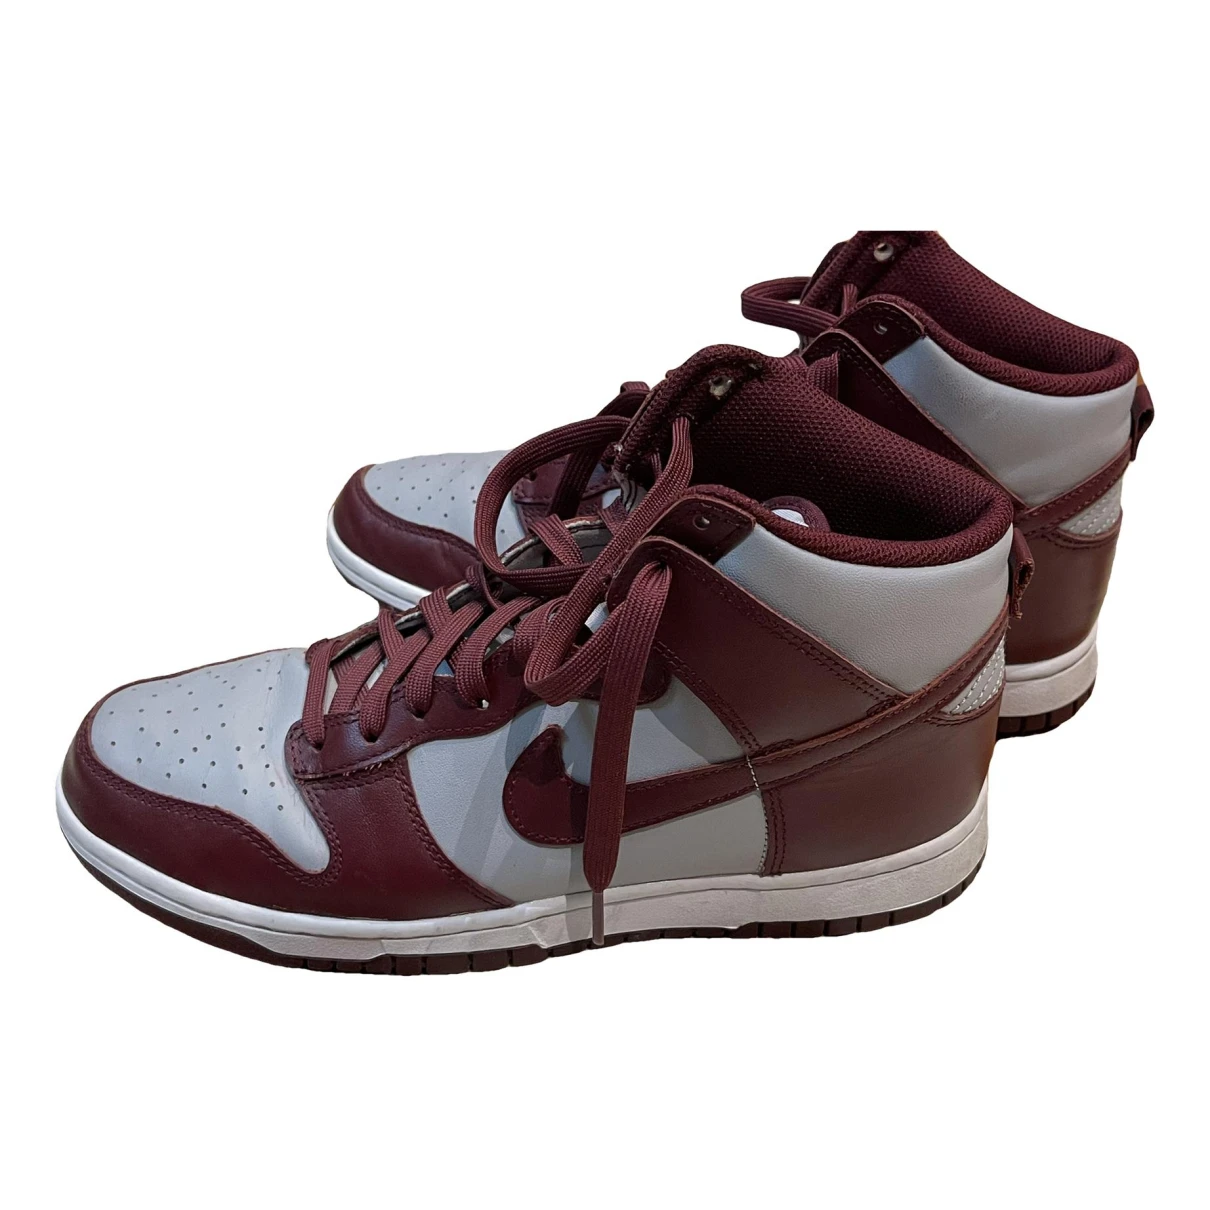 Pre-owned Nike Sb Dunk Leather High Trainers In Burgundy